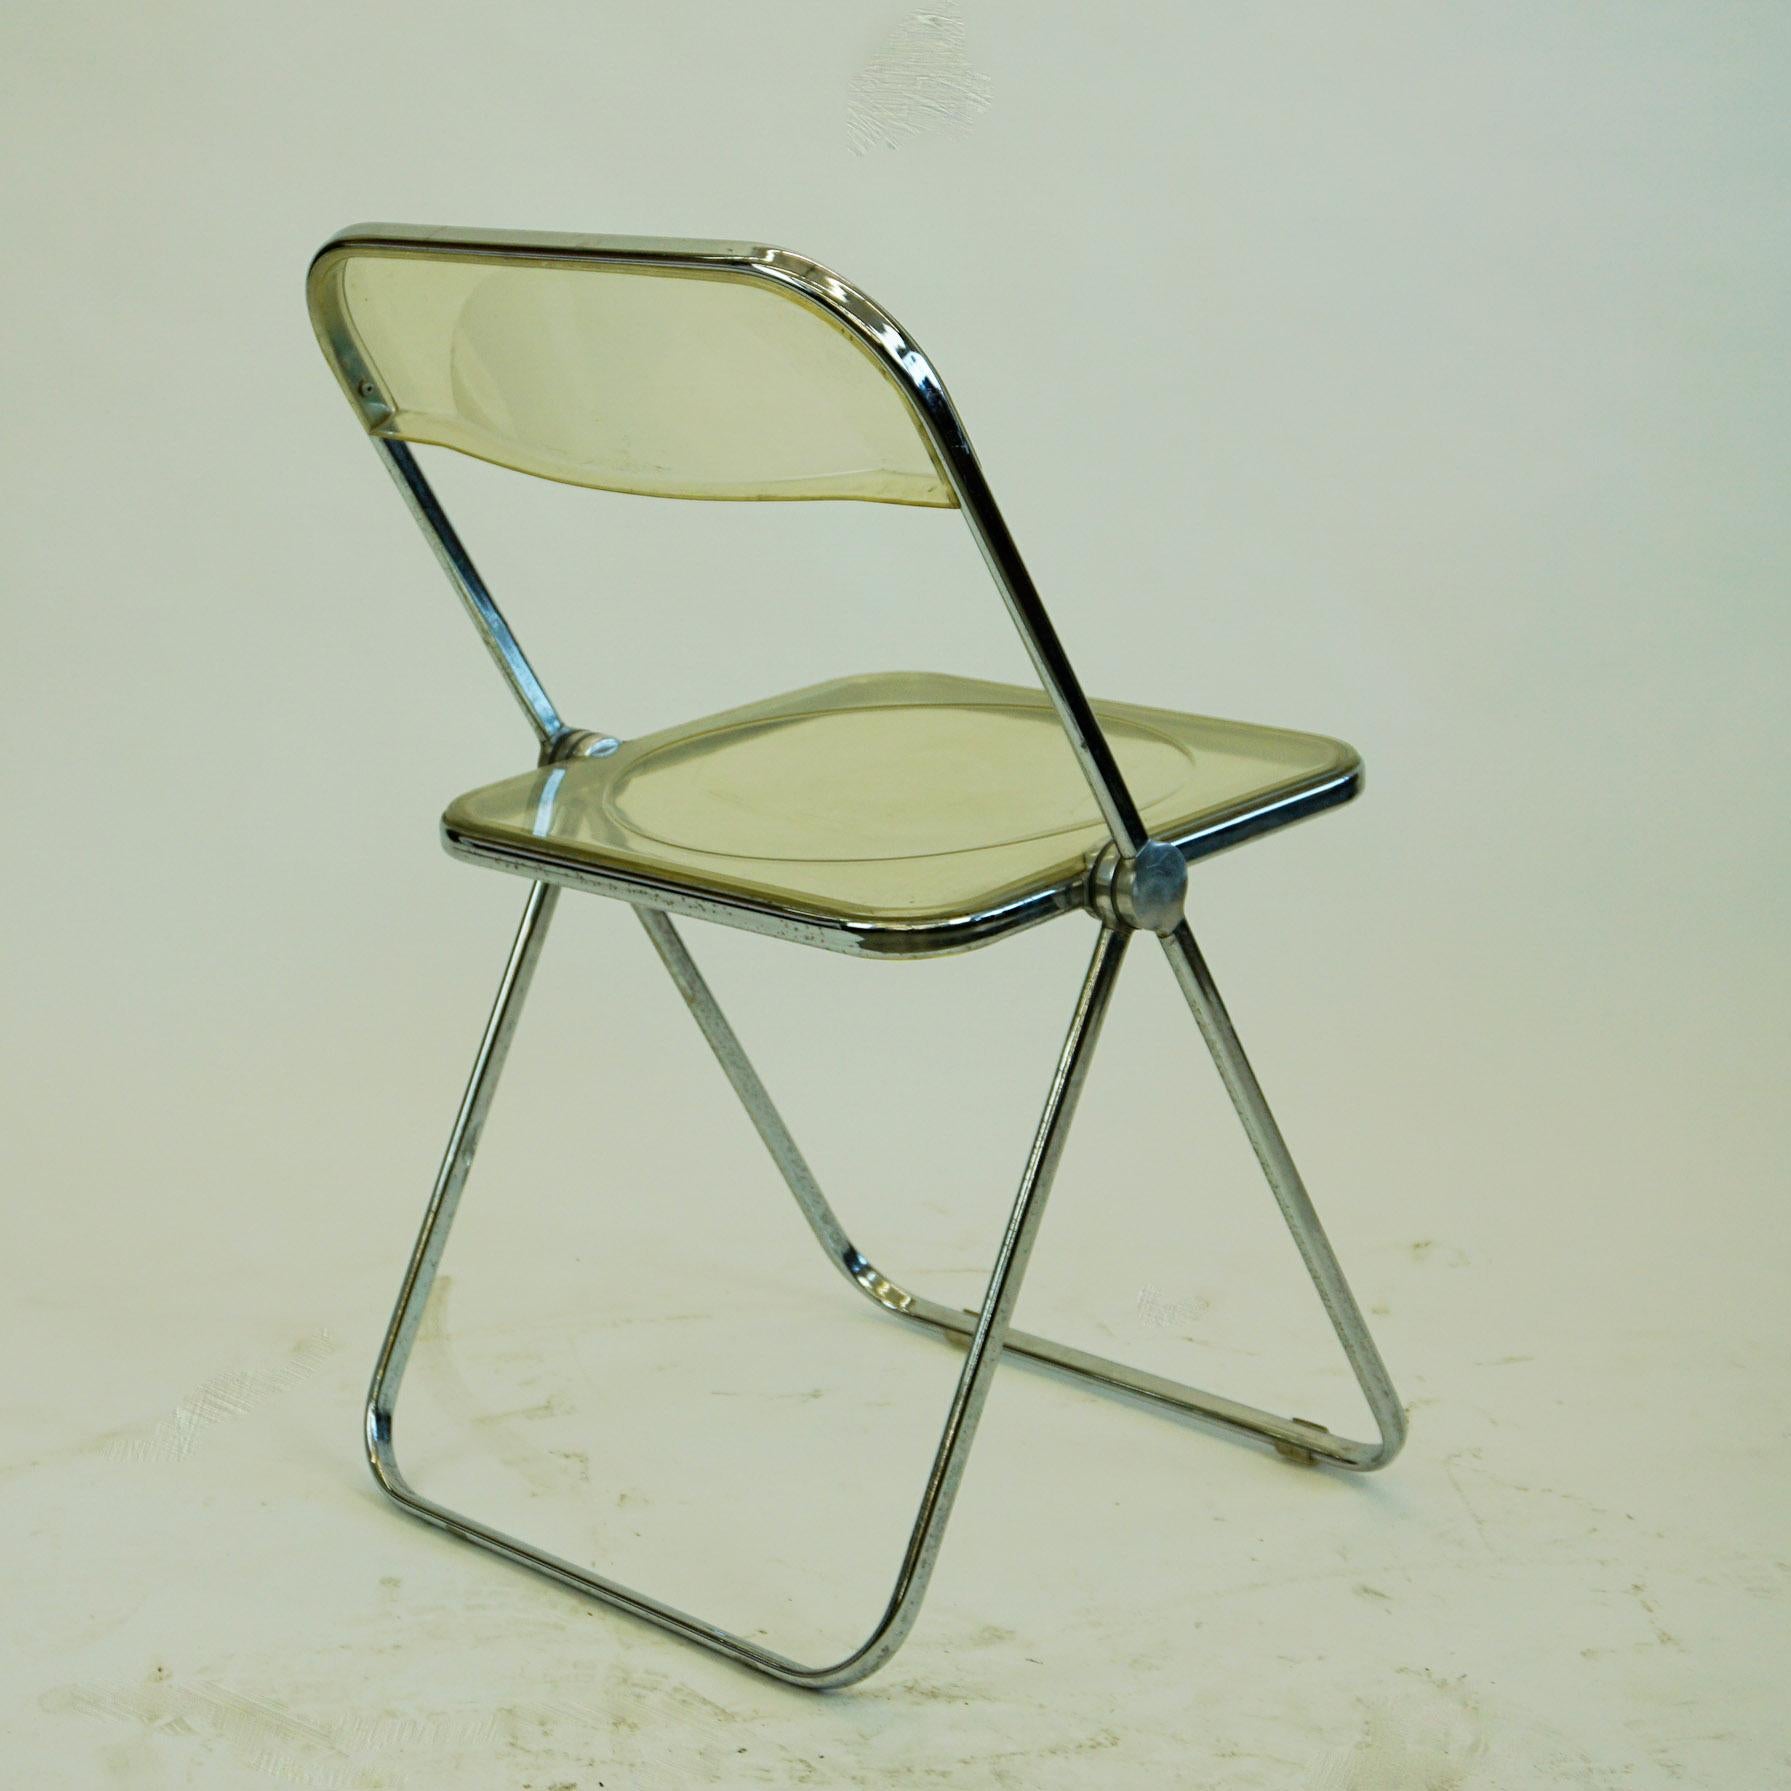 Mid-Century Modern Italian 1960s Chrome and Lucite Plia Folding Chairs by G. Piretti for Castelli